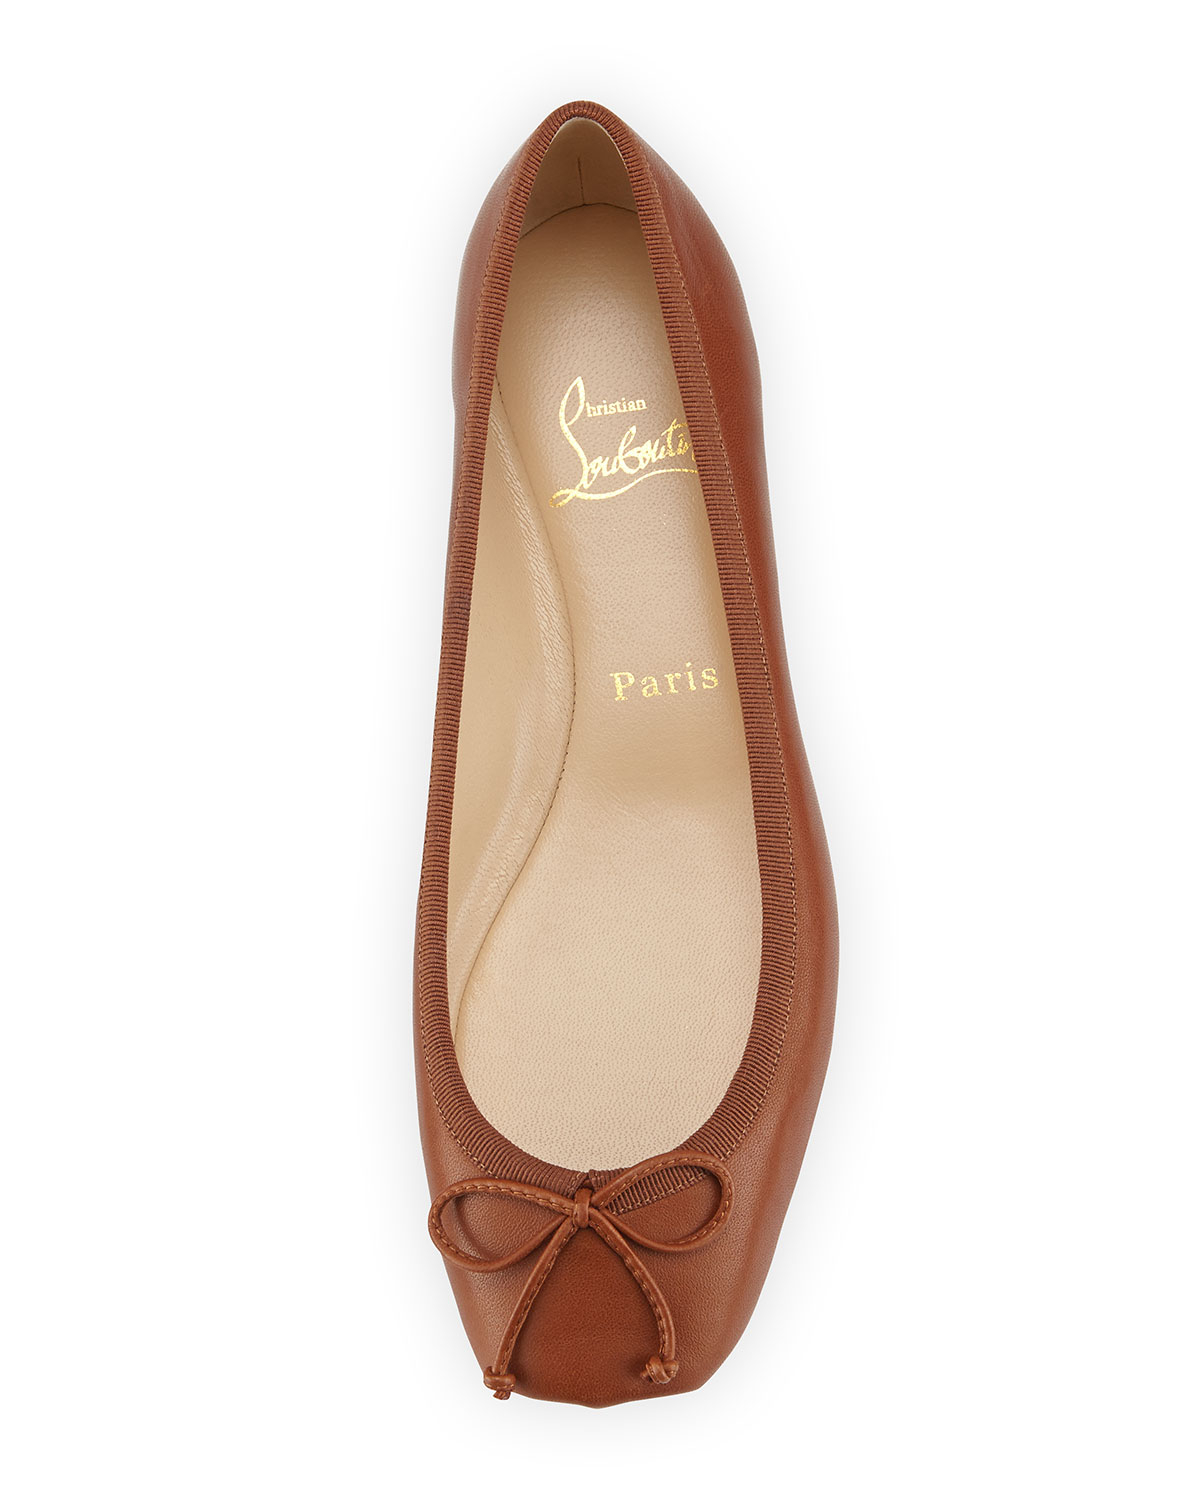 christian louboutin knockoffs cheap - christian louboutin square-toe flats Brown patent leather ...